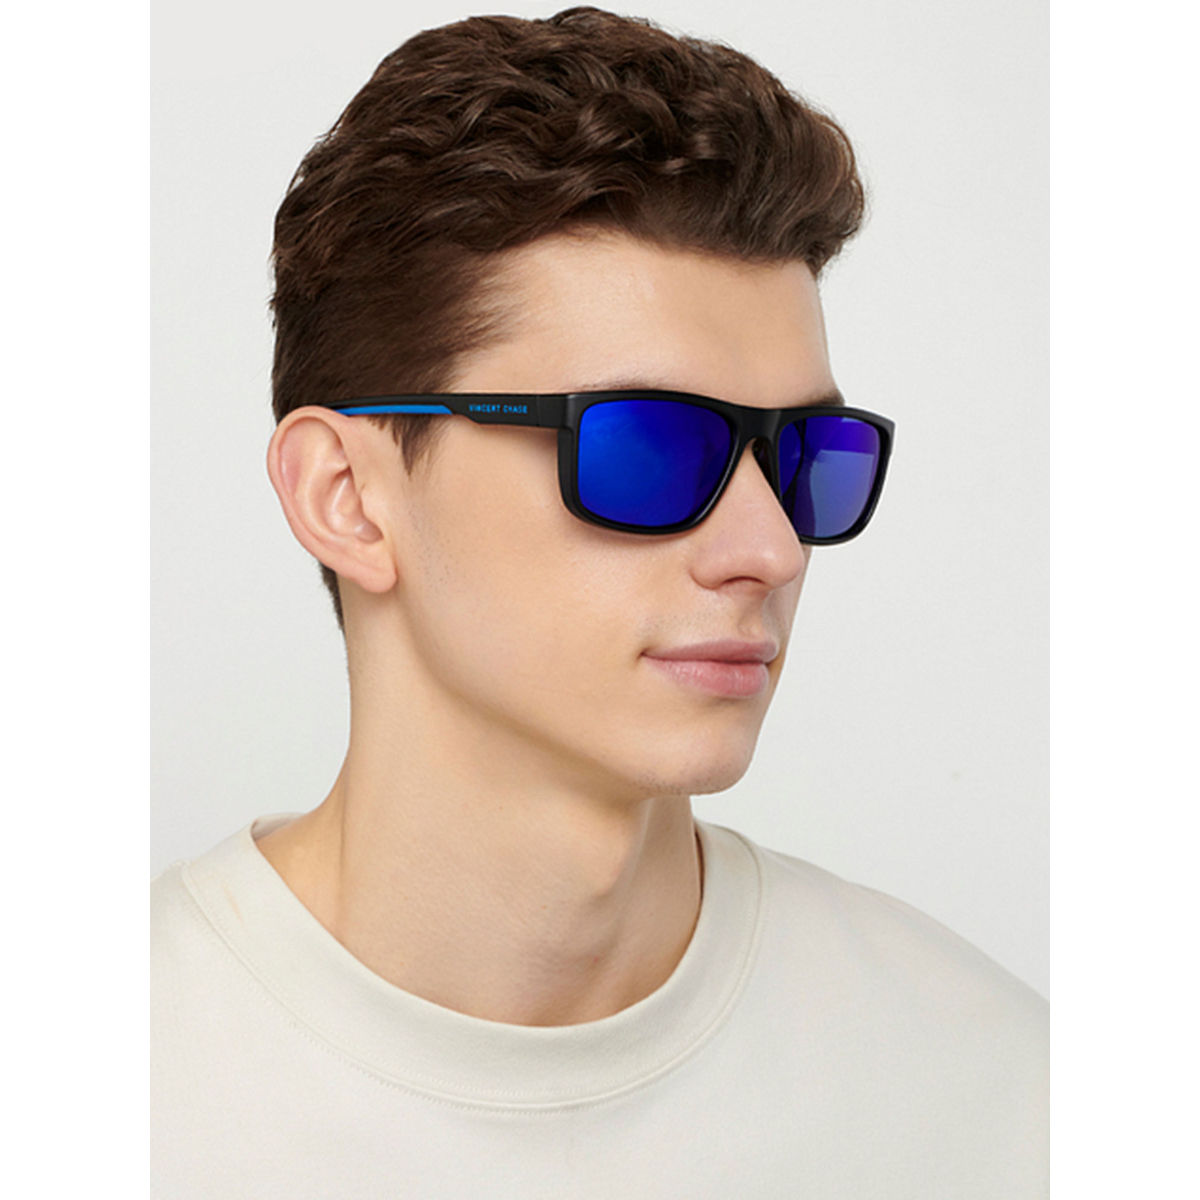 SCVCN Mens Outdoor Sports Glasses Lenskart For Cycling, Mountain Biking,  And Hiking From Channeli, $4.68 | DHgate.Com